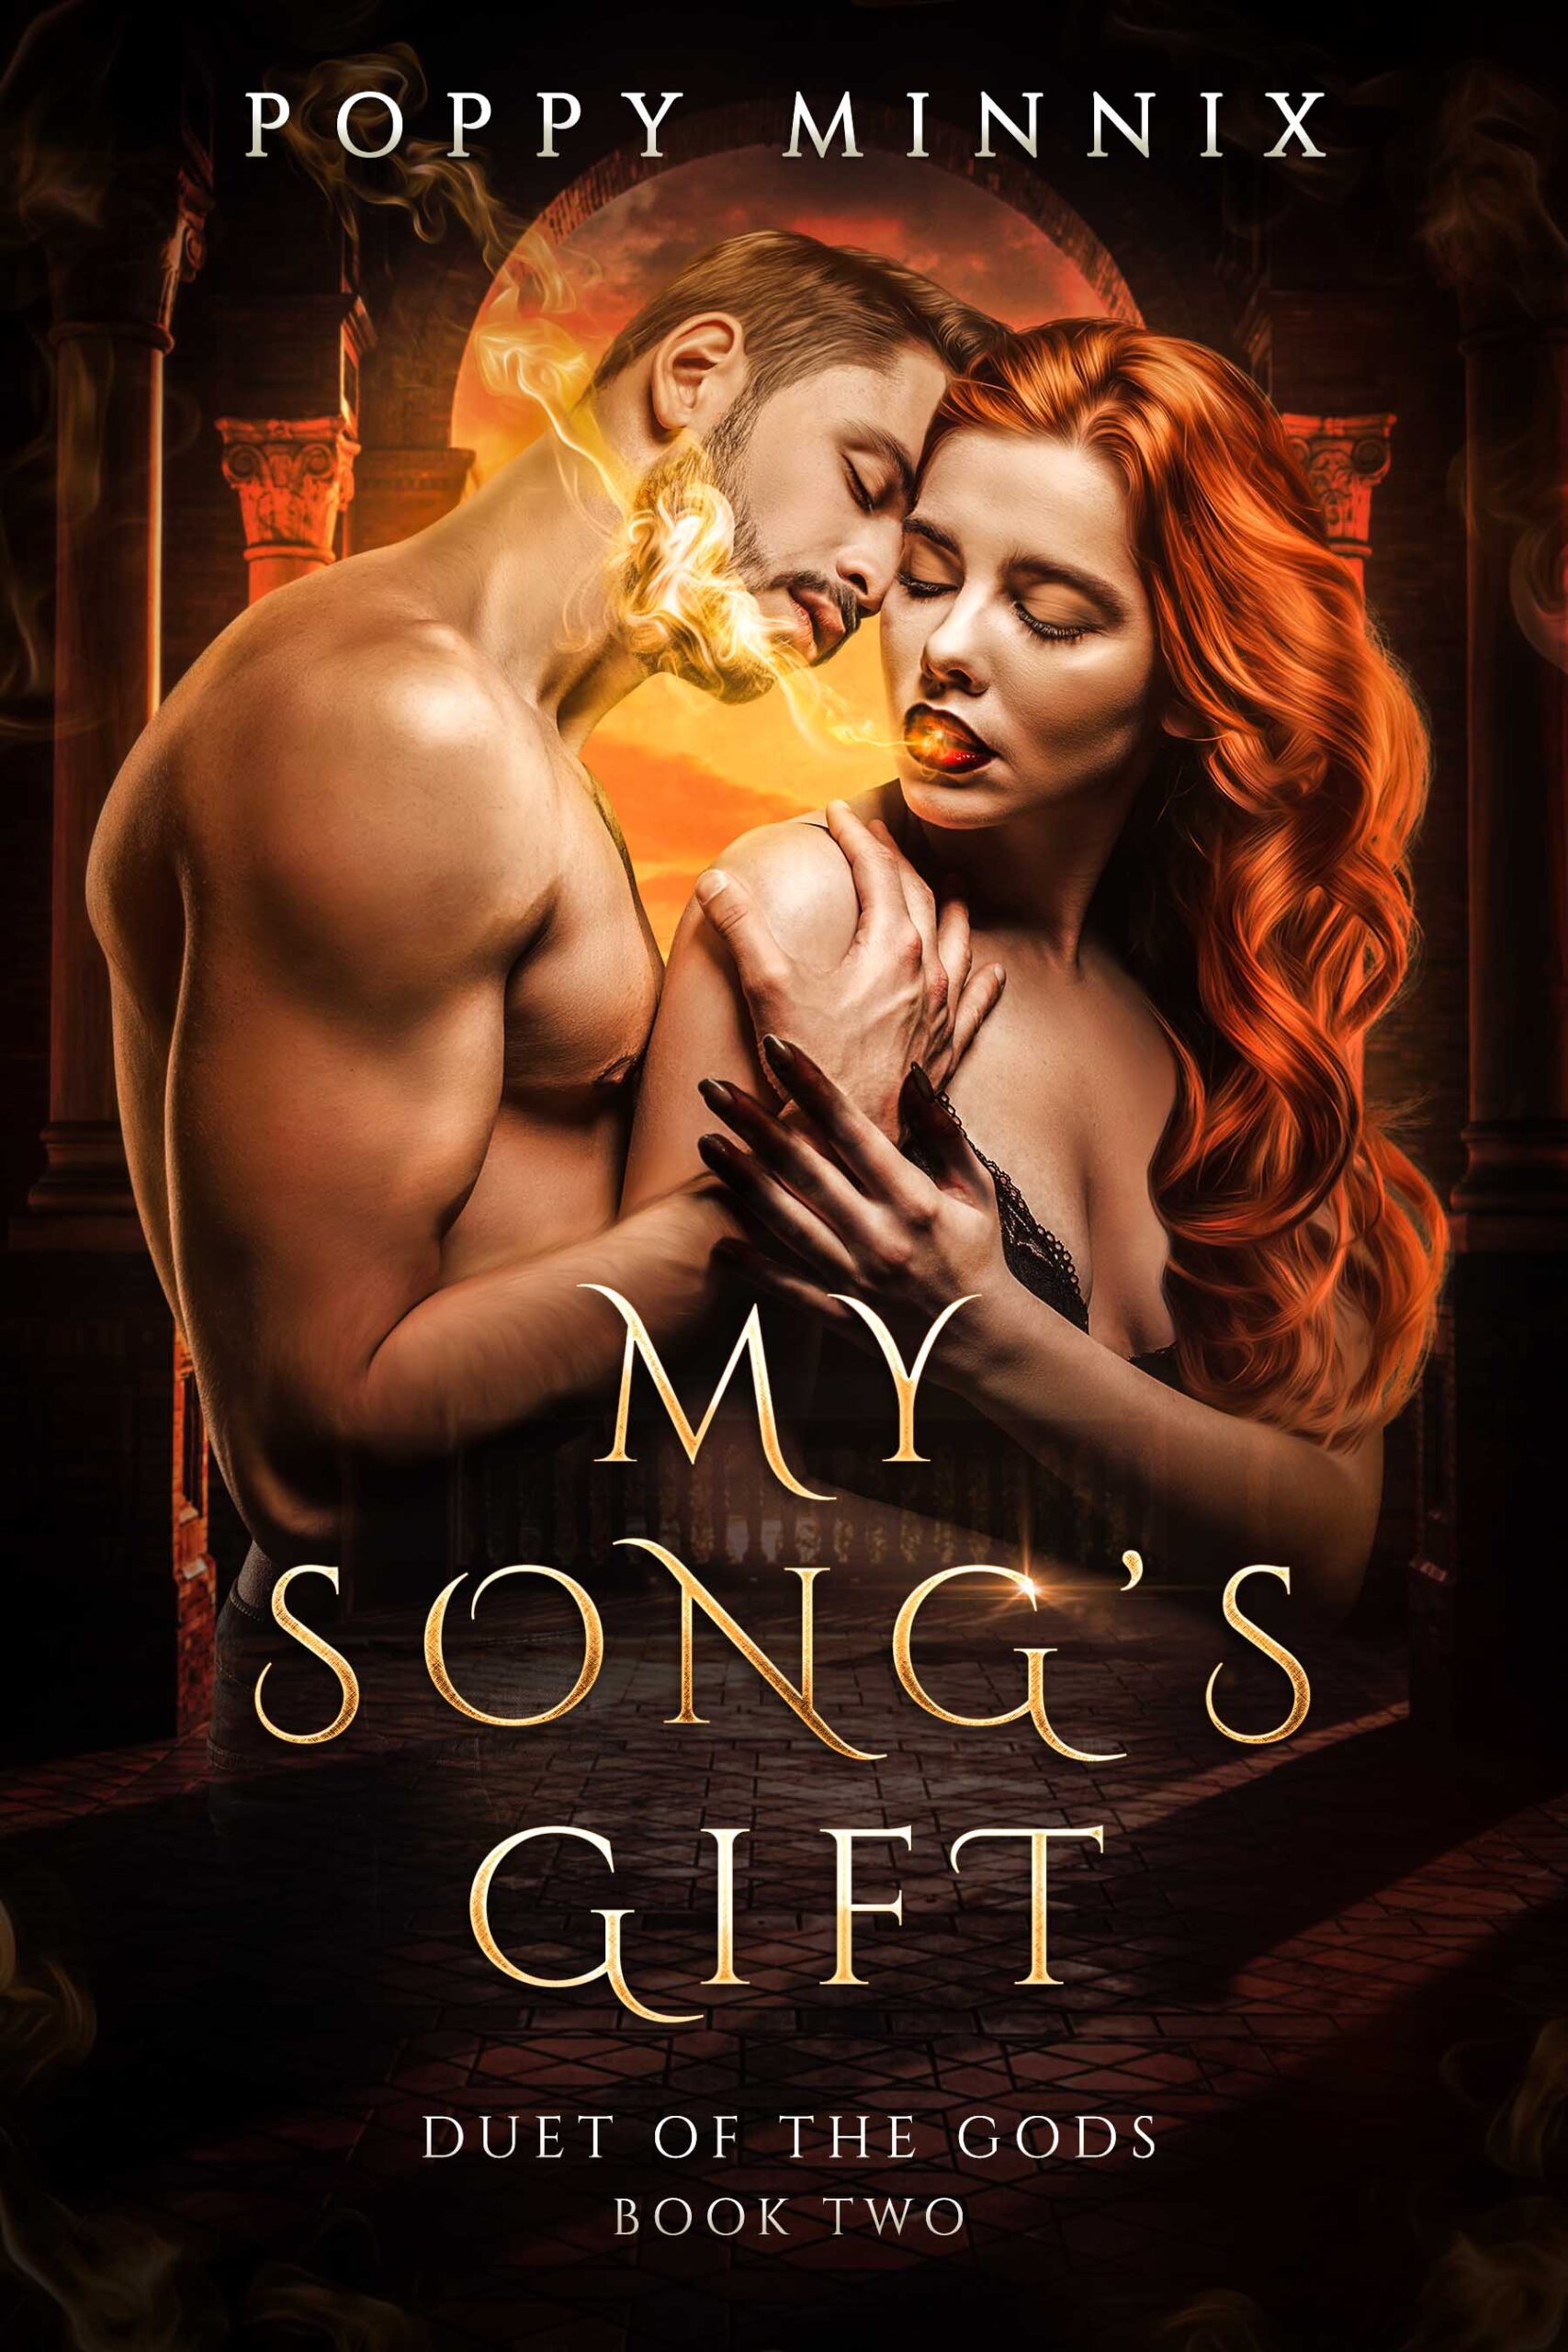 My Song's Gift by Poppy Minnix